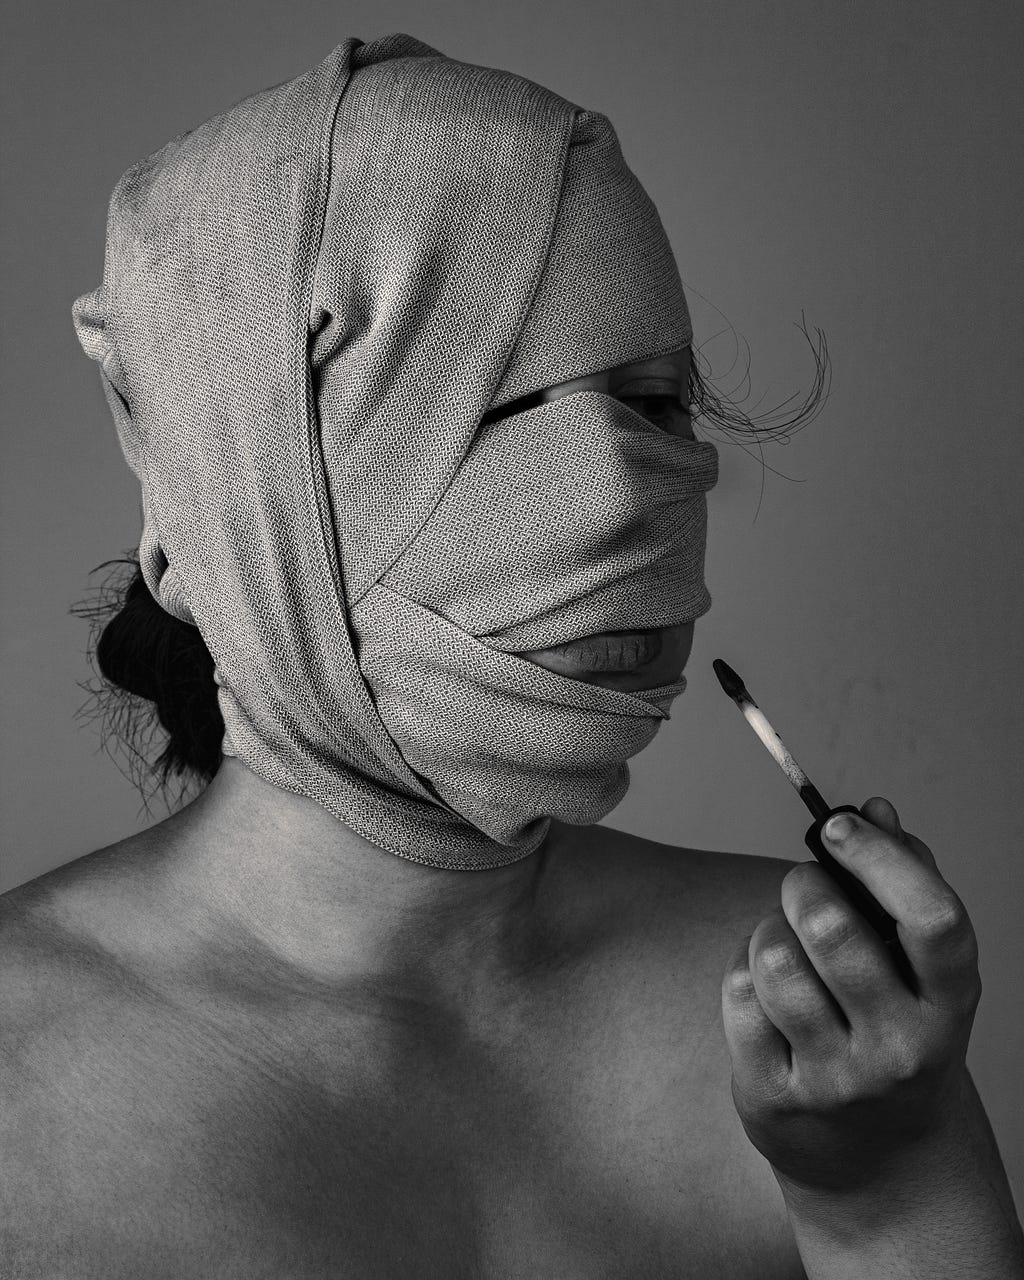 A woman with a cloth-wrapped head tries to carmine her lips.